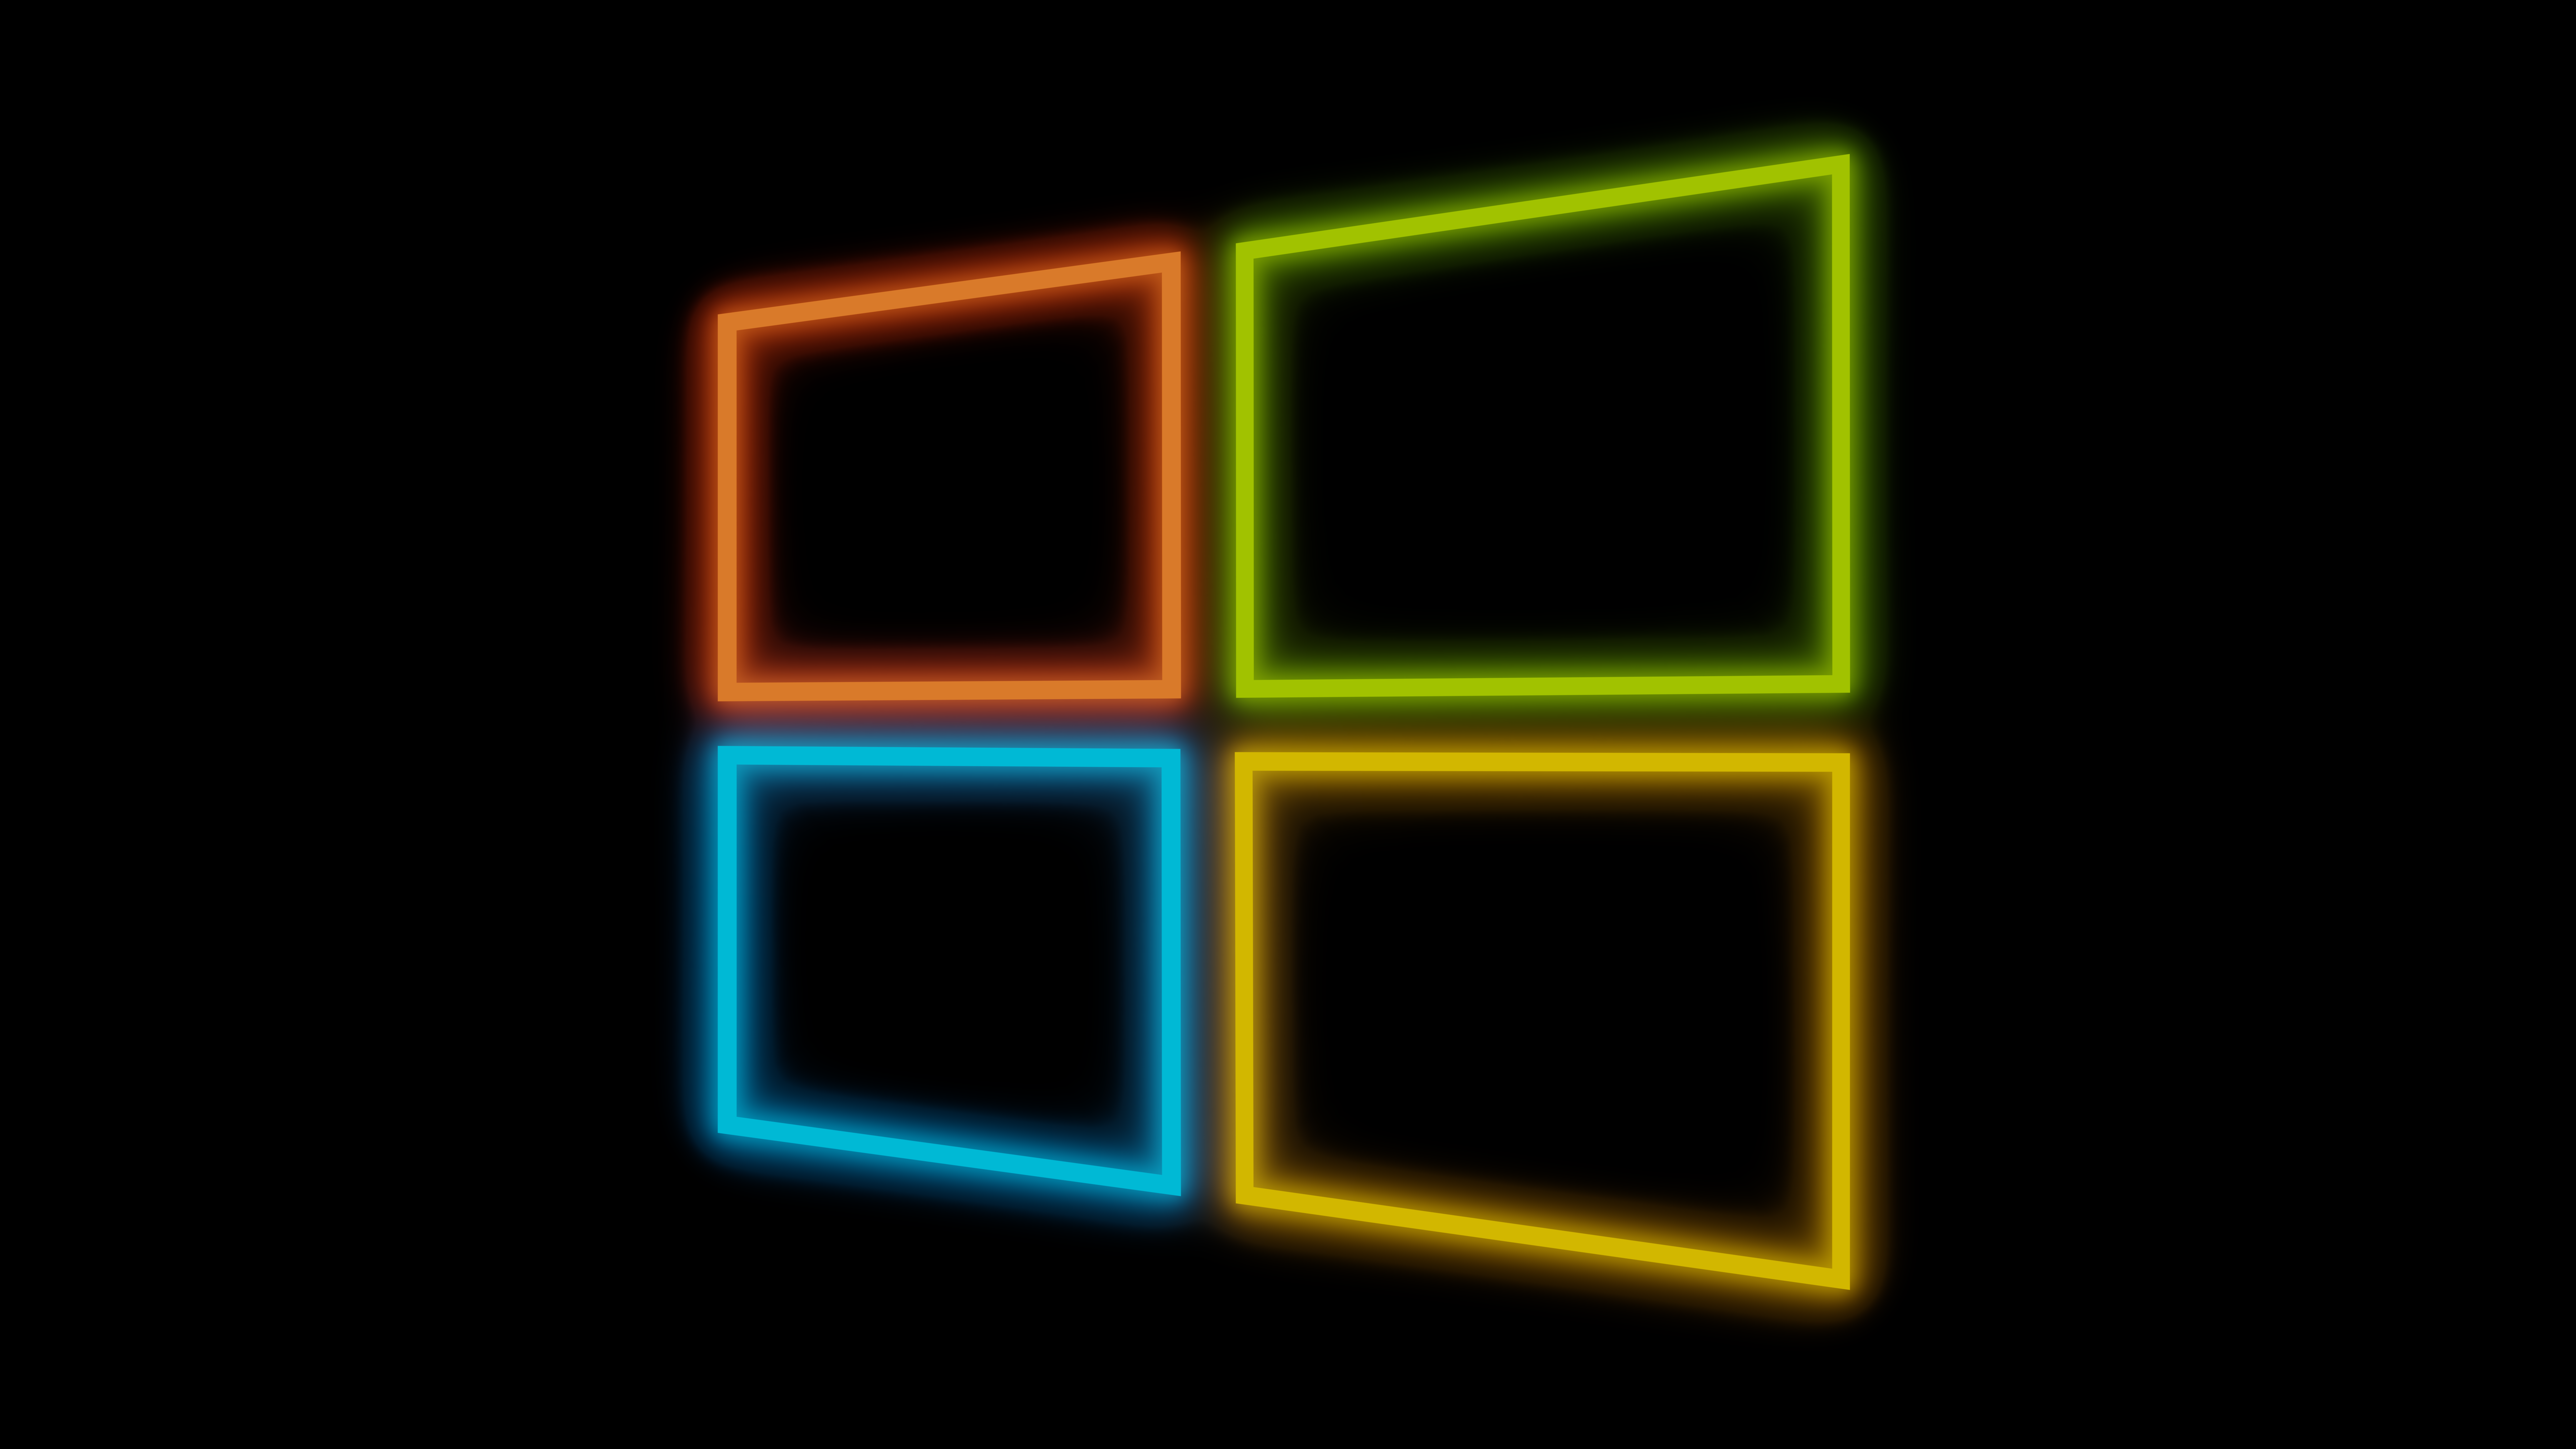 Windows 4K wallpaper for your desktop or mobile screen free and easy to download